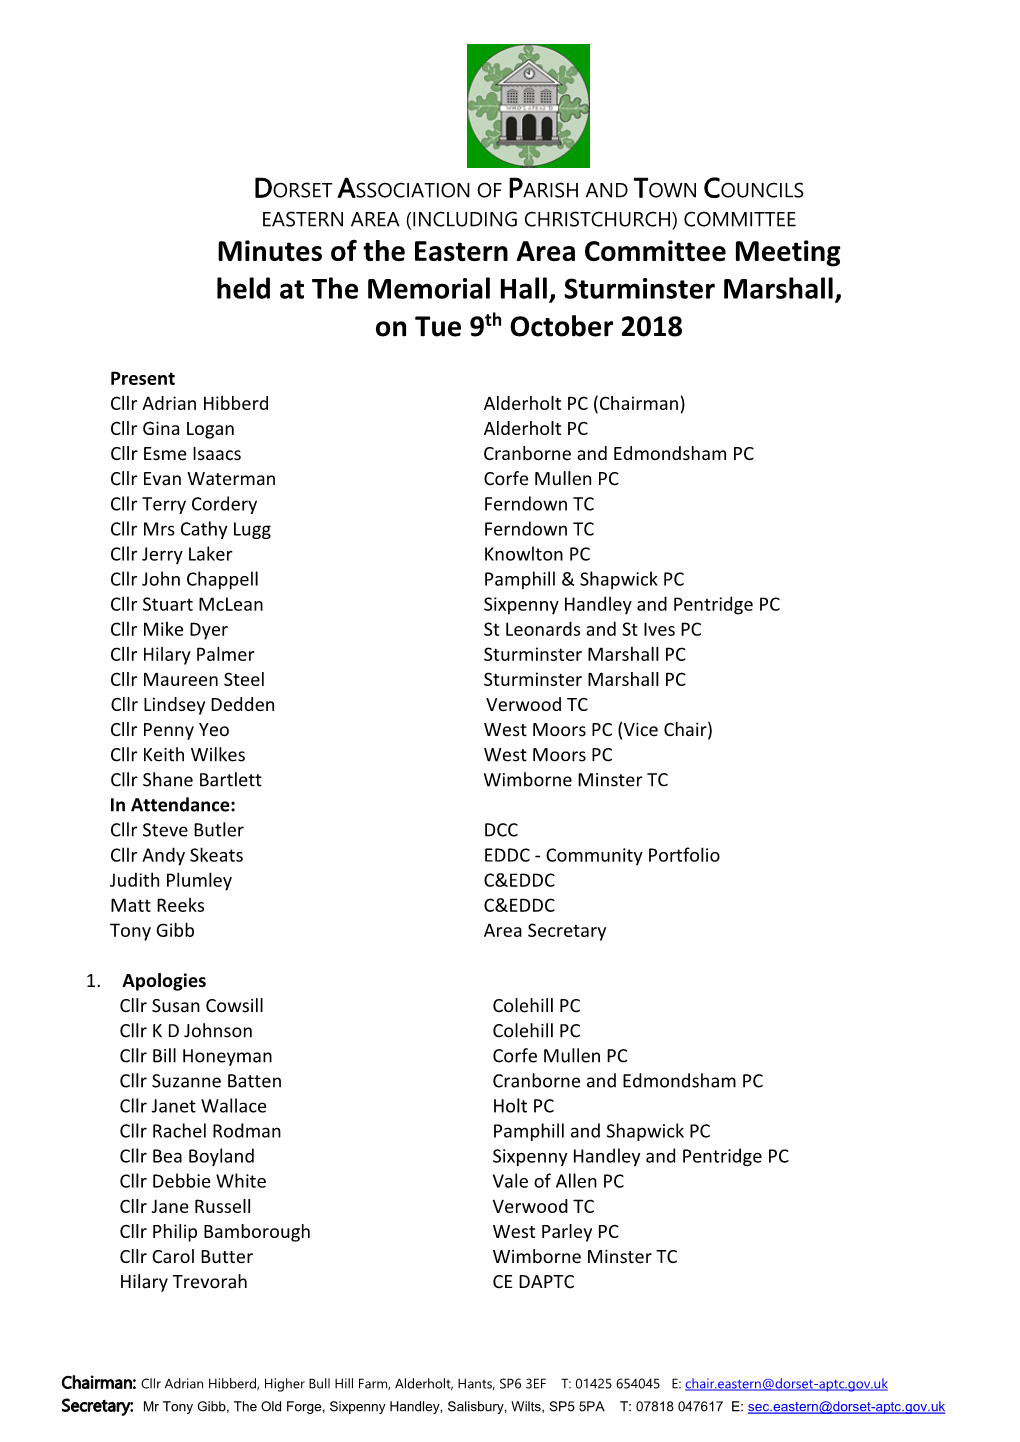 Minutes of the Eastern Area Committee Meeting Held at the Memorial Hall, Sturminster Marshall, on Tue 9Th October 2018